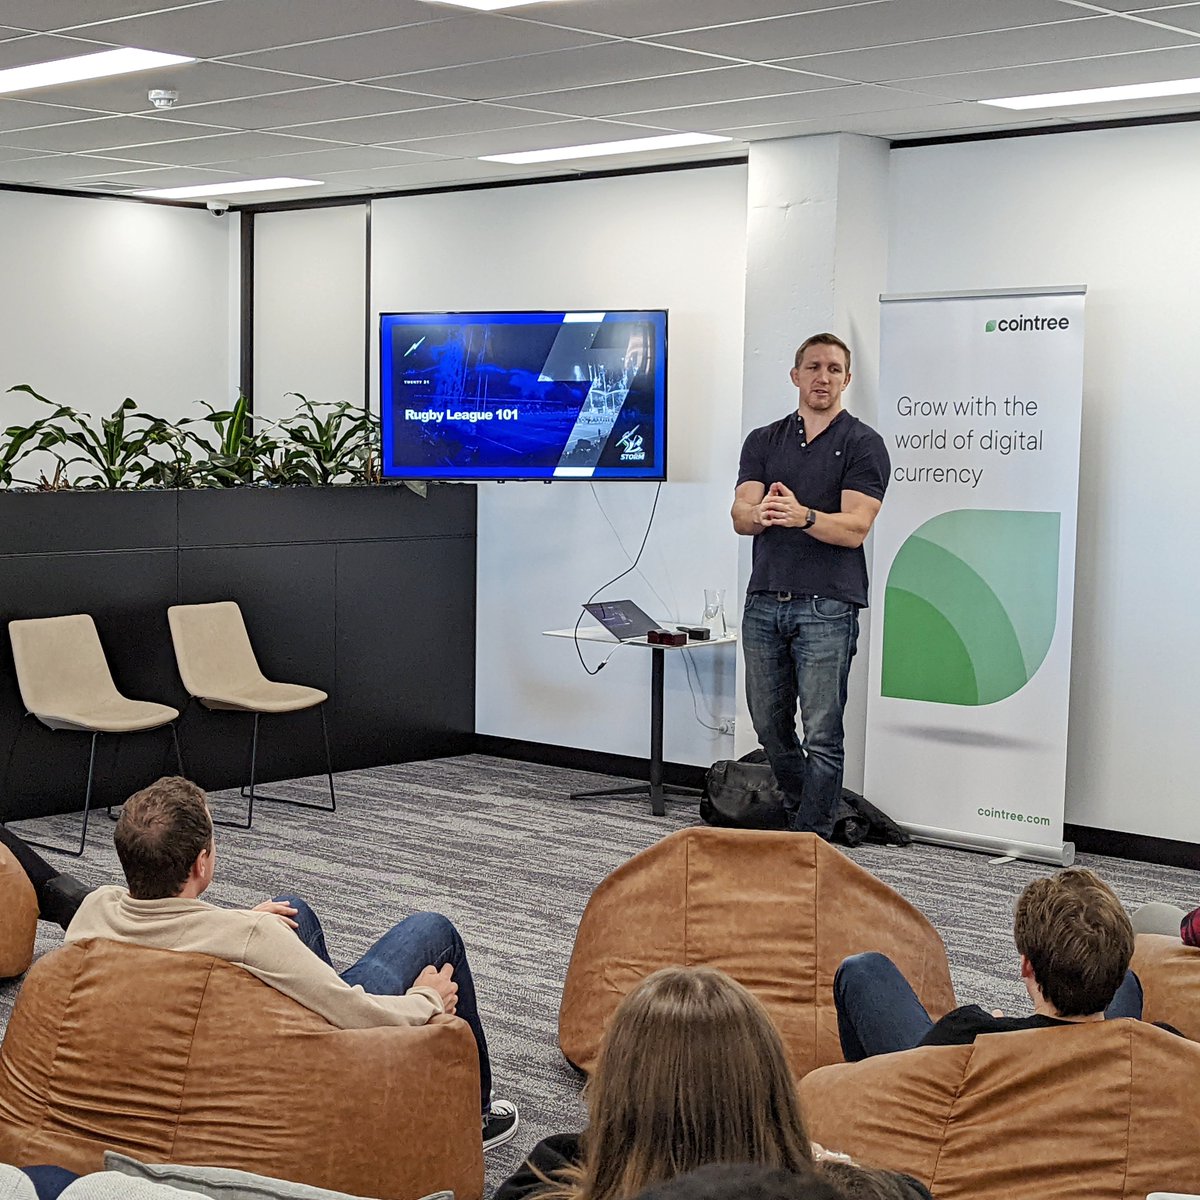 It was such a pleasure to have @RyanHoffman12  of @storm chat to us about the history of rugby league, the complexity of the game, and the incredible talent of the players ⚡️

Thanks for joining us at Cointree HQ!